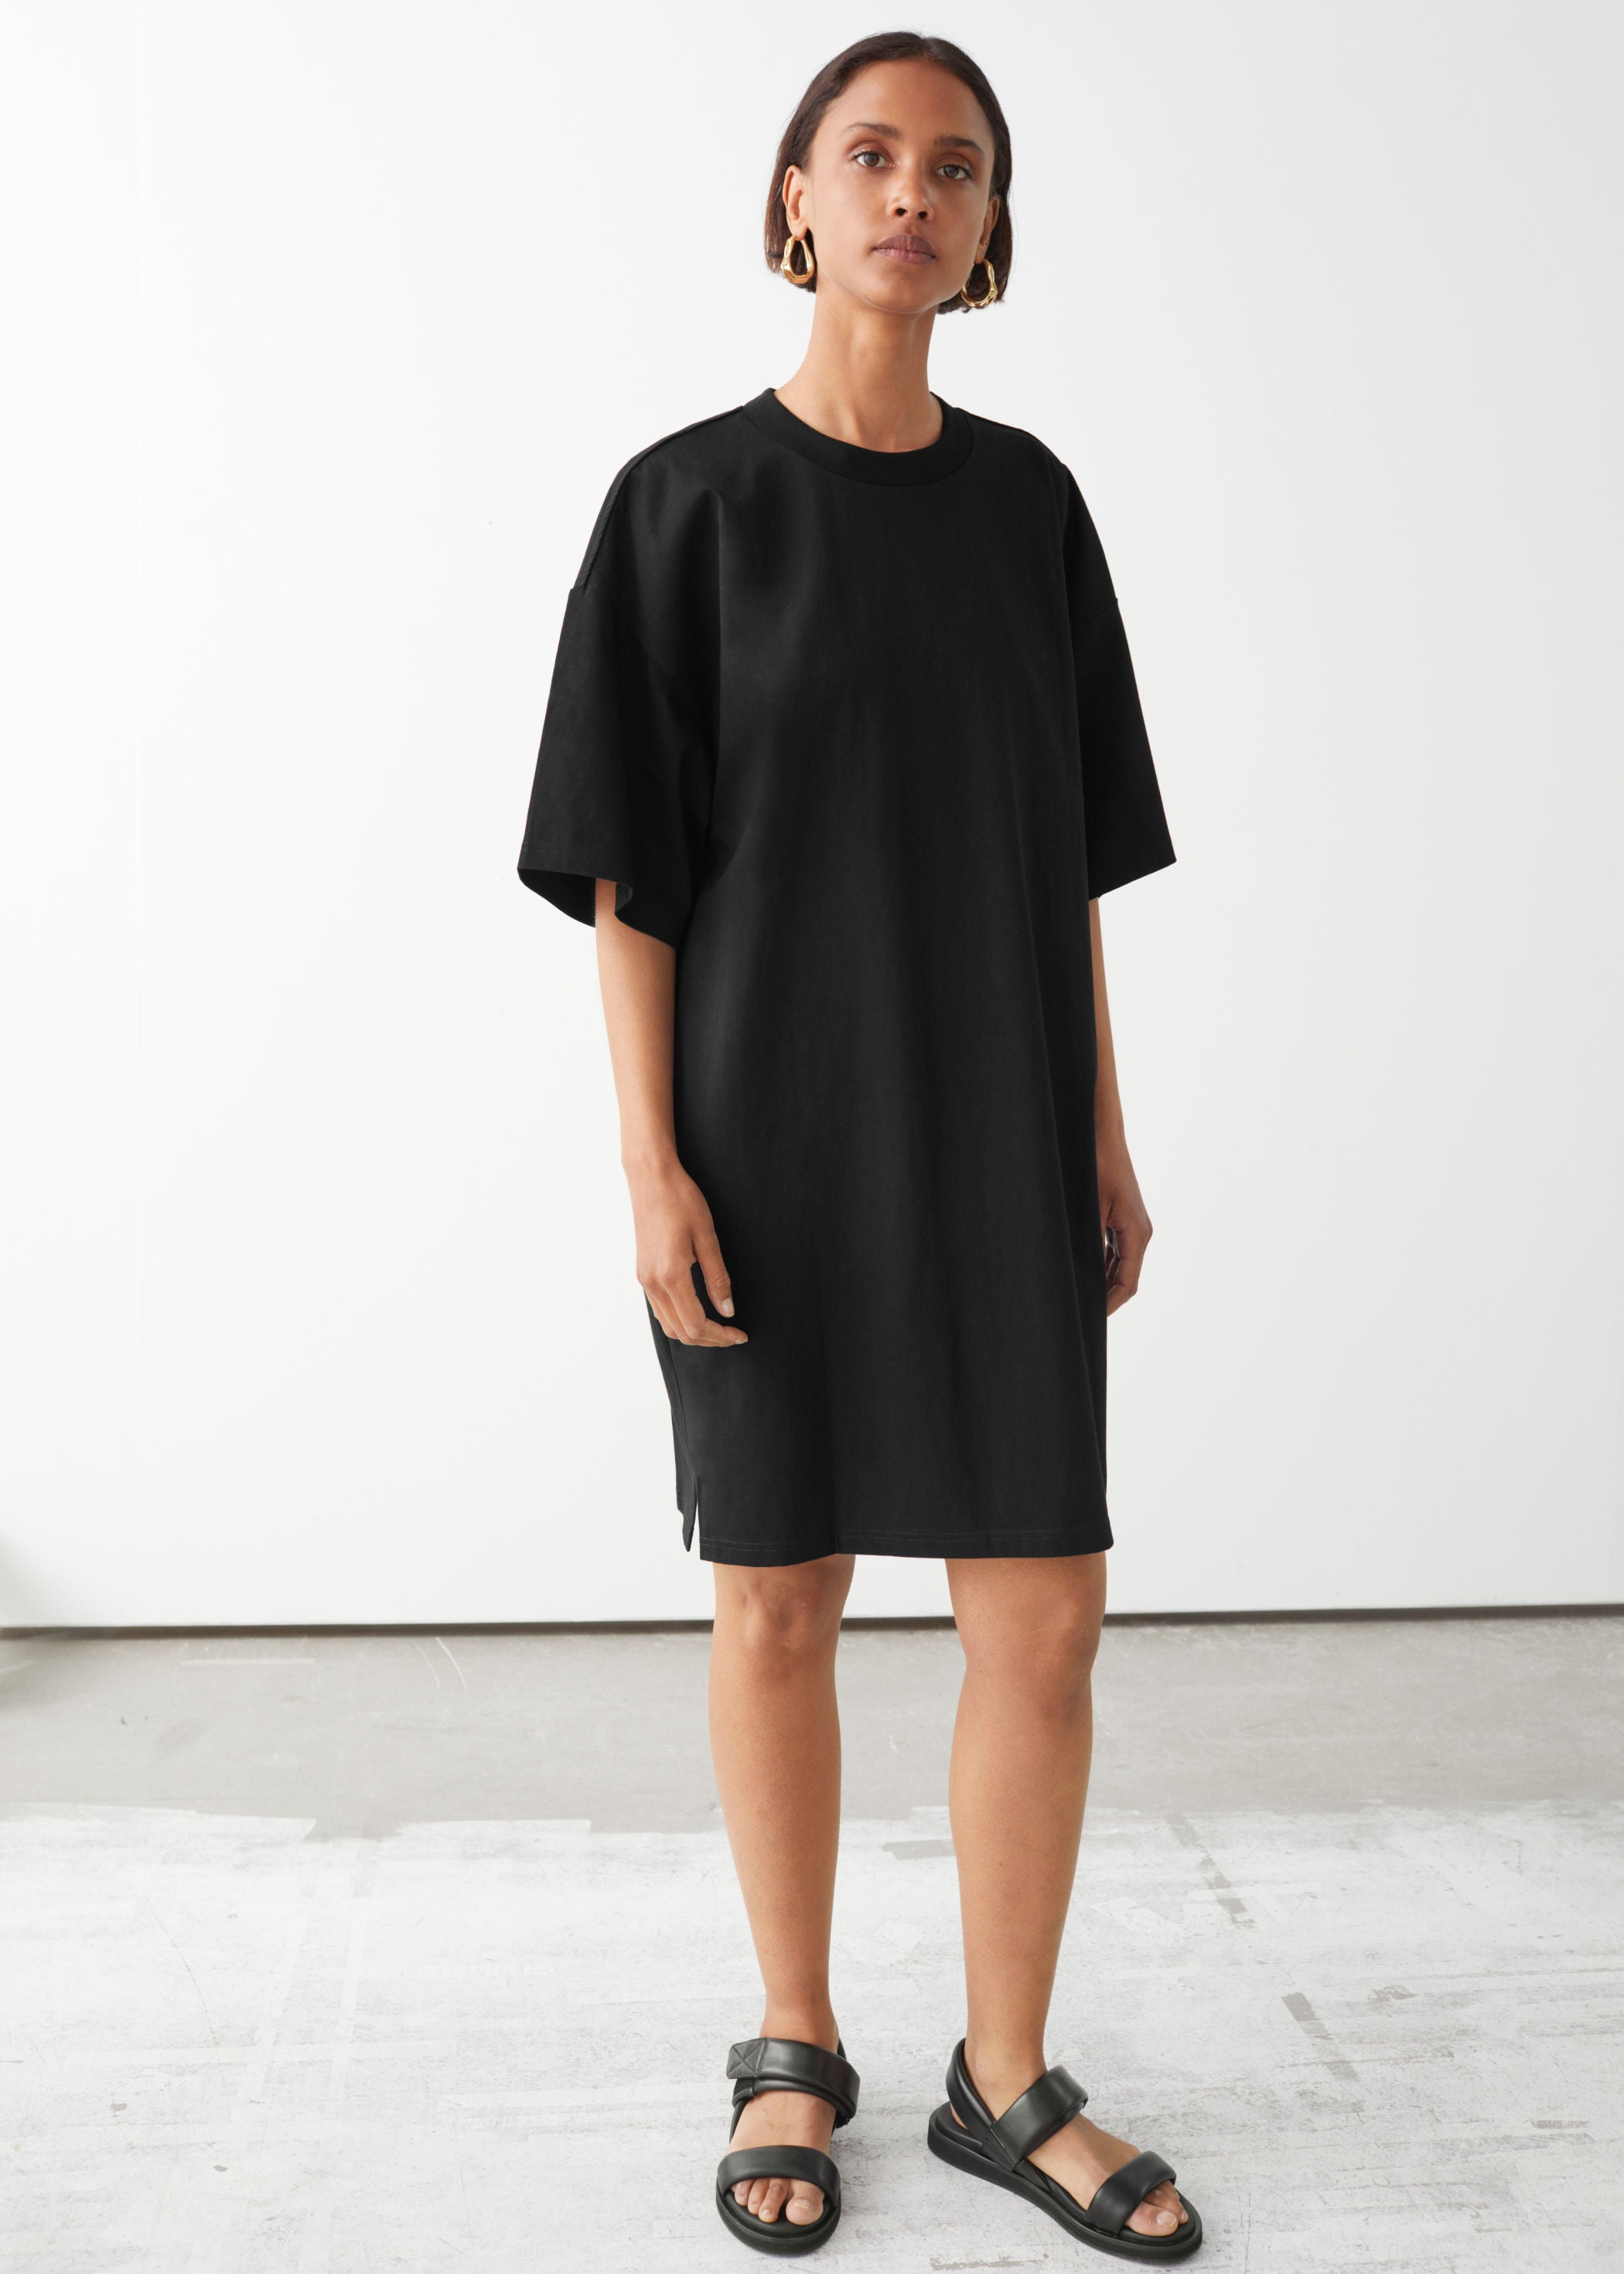 & Other Stories + Relaxed T-Shirt Mini Dress